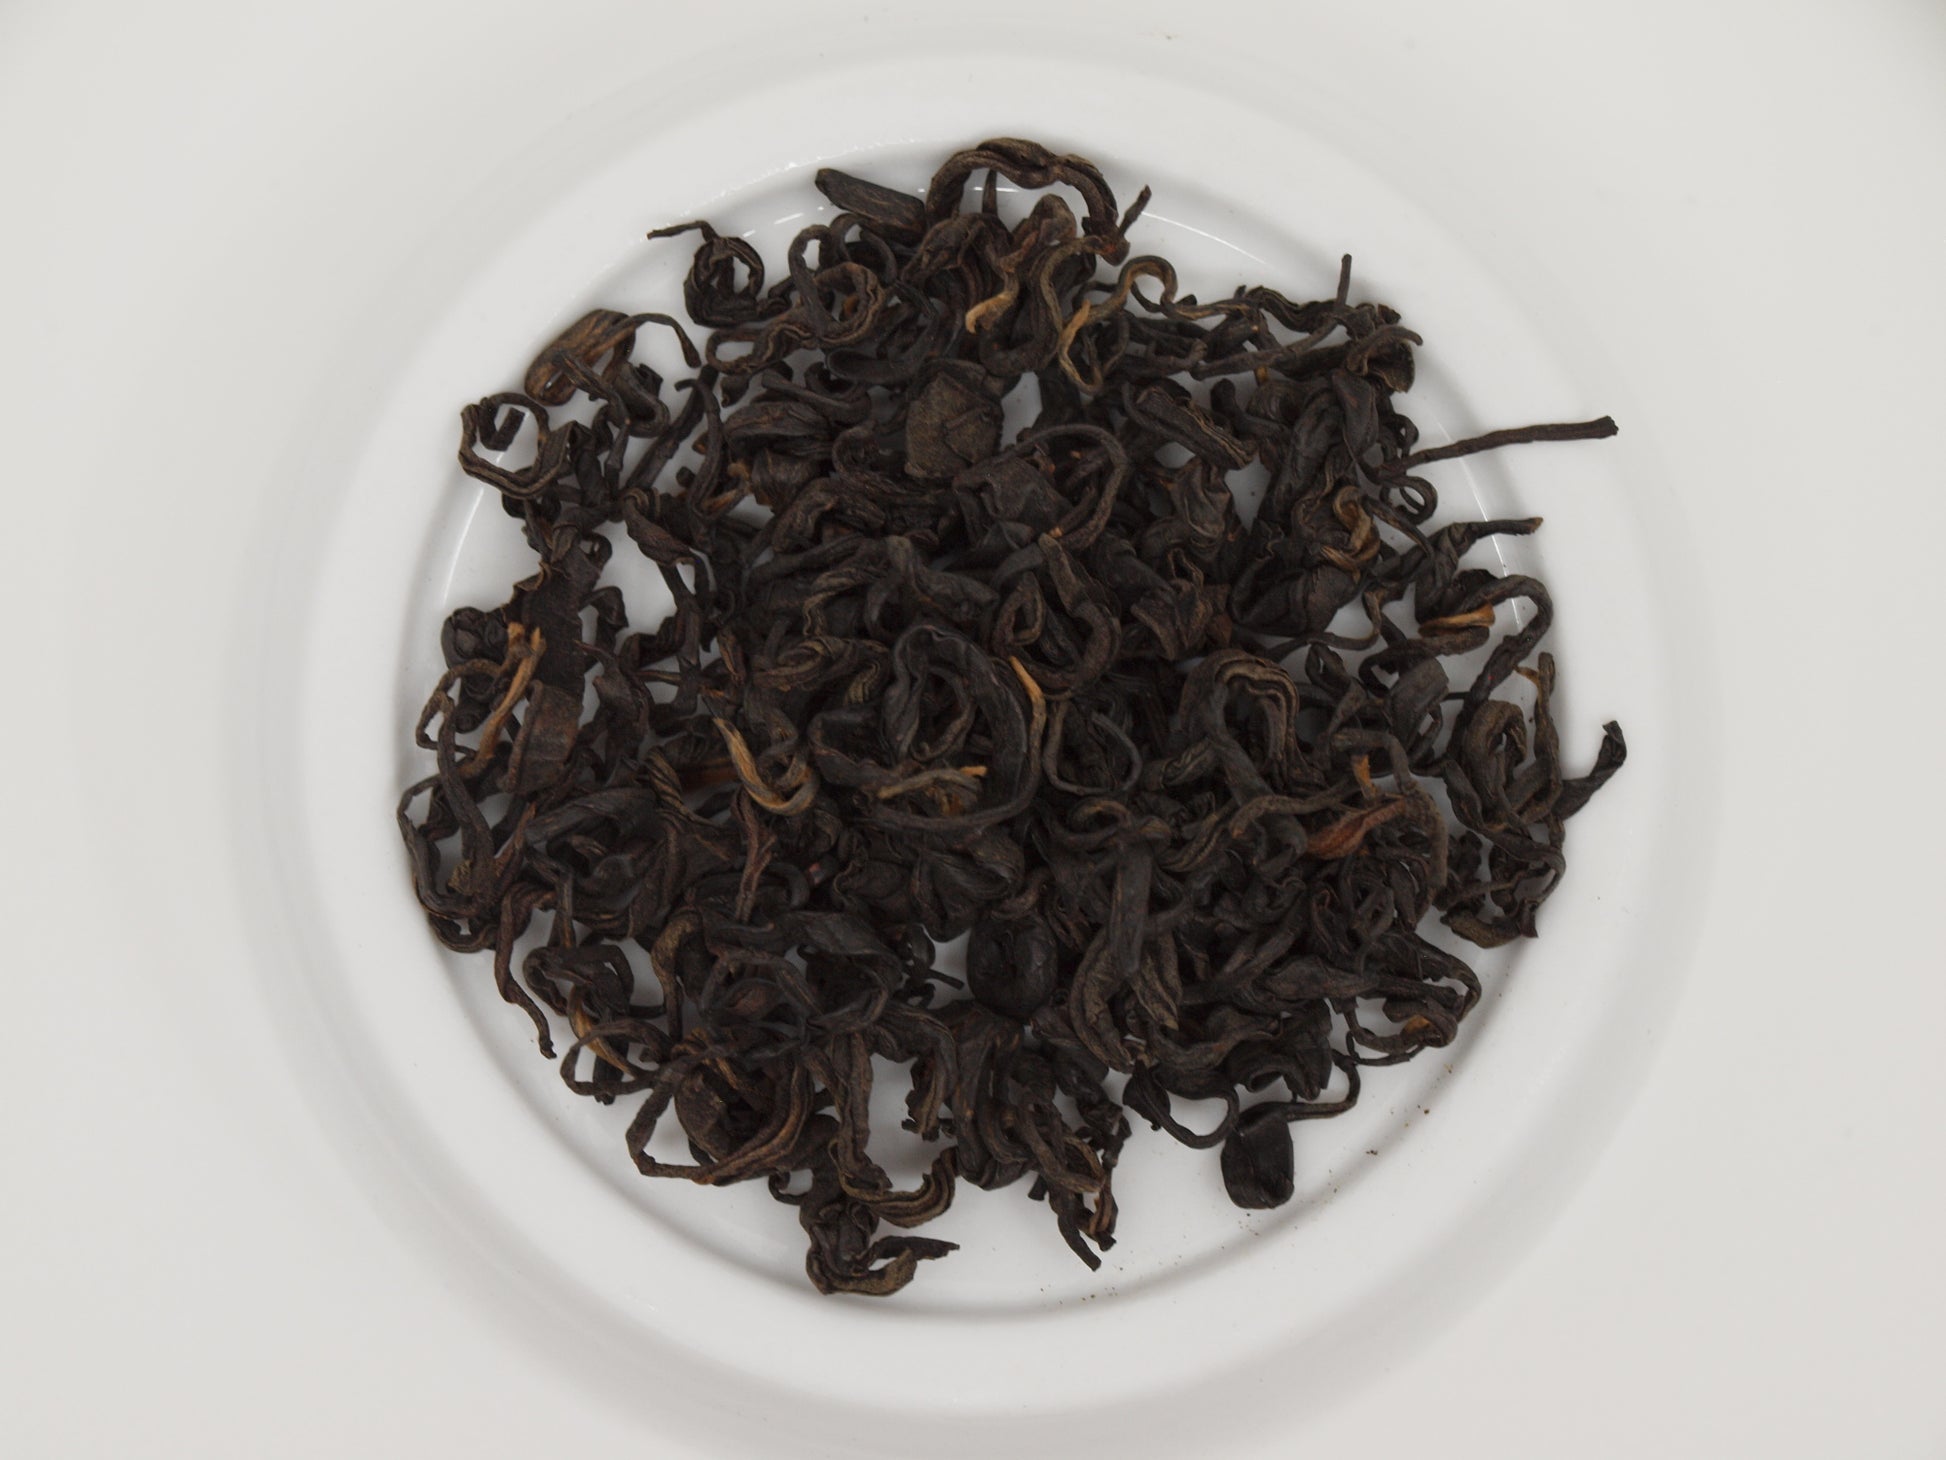 Nepali Oolong tea resting on a porcelain dish, top down perspective